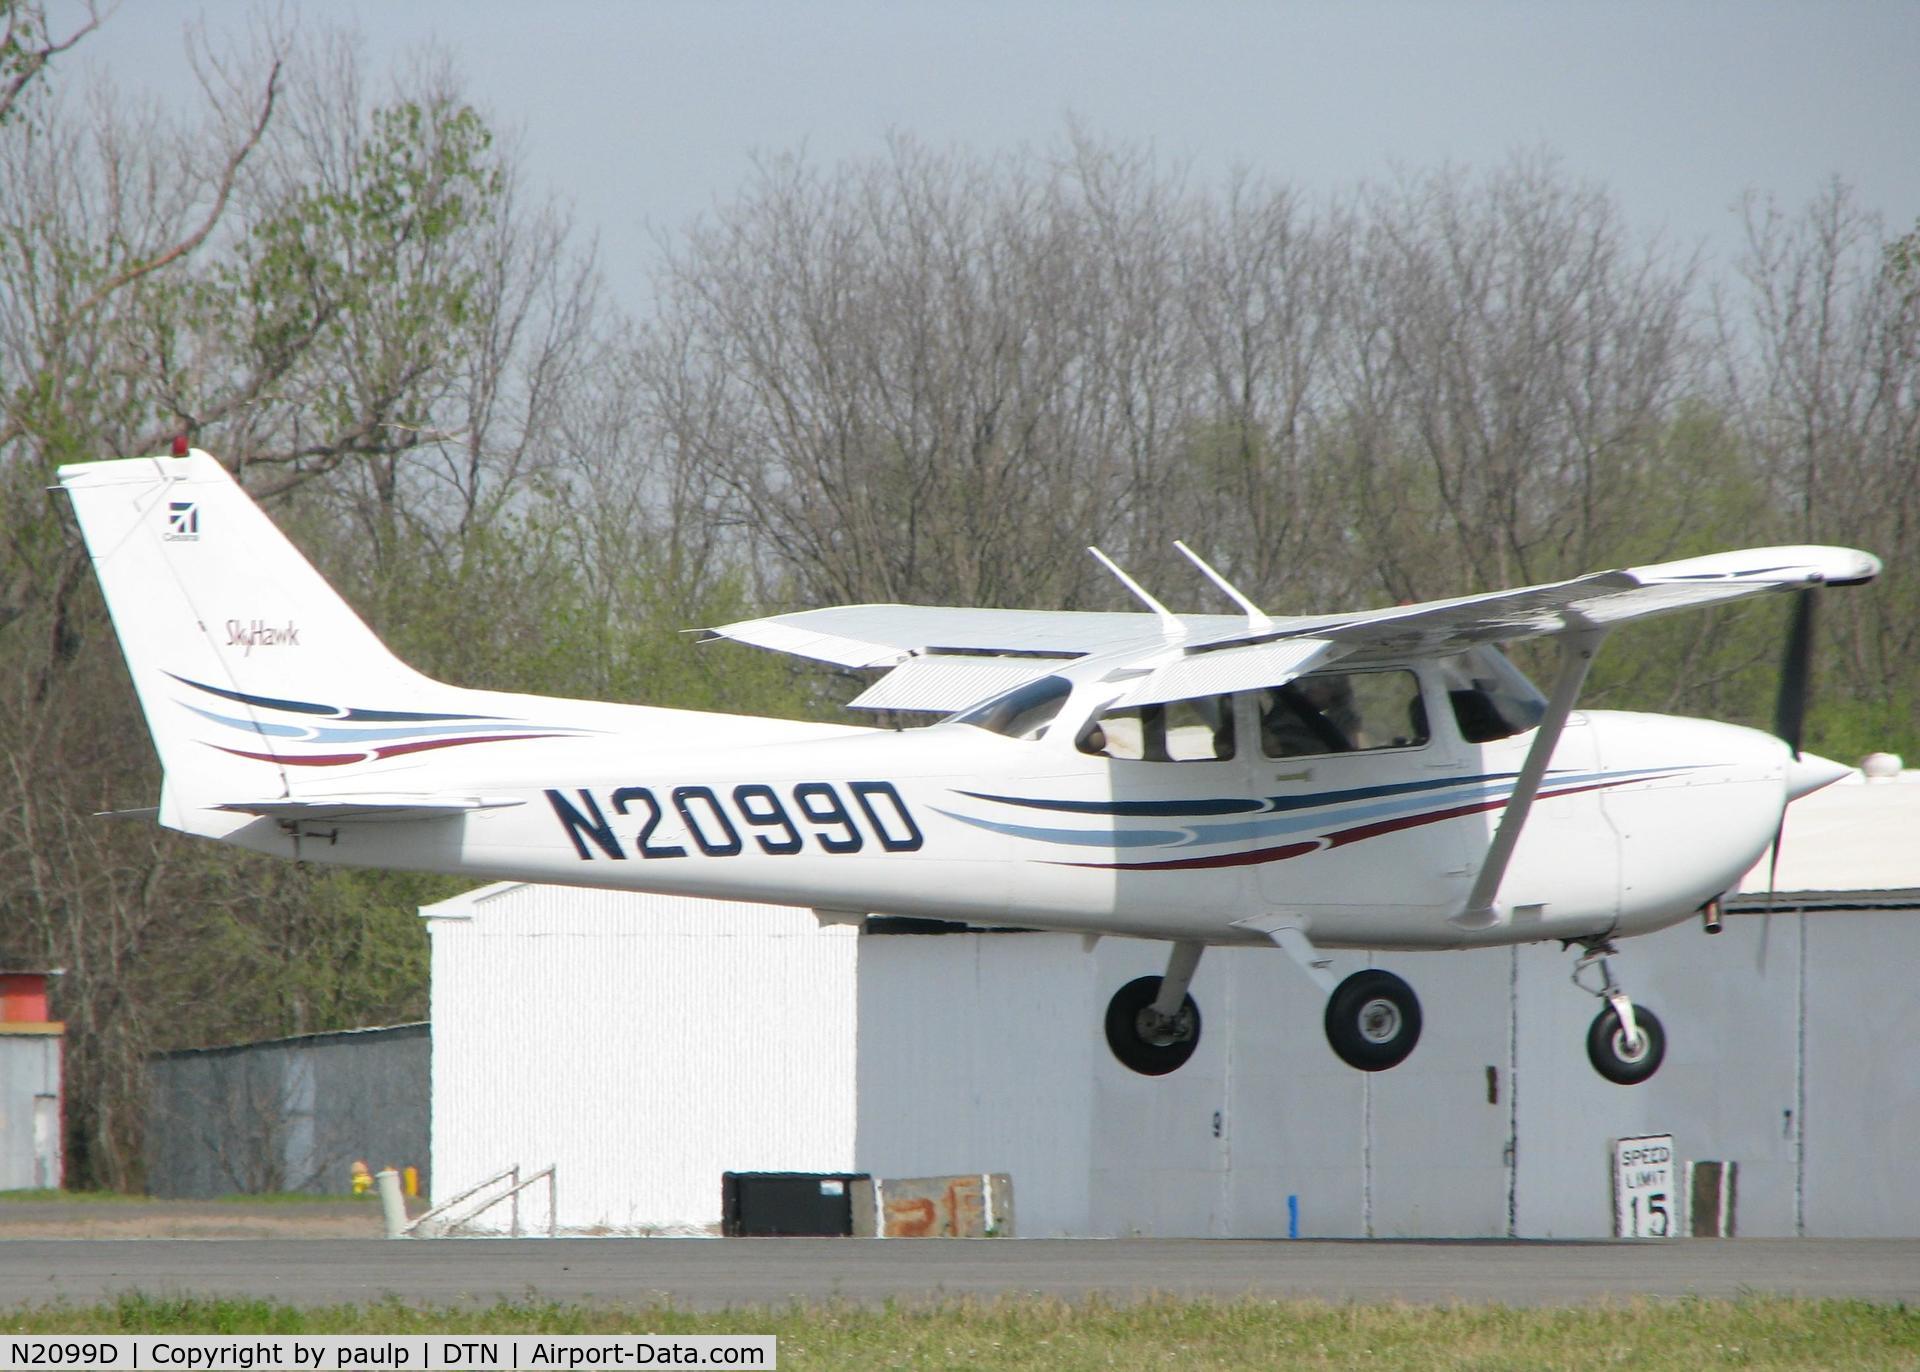 N2099D, 2004 Cessna 172R C/N 17281204, About to touch down at the Shreveport Downtown airport.